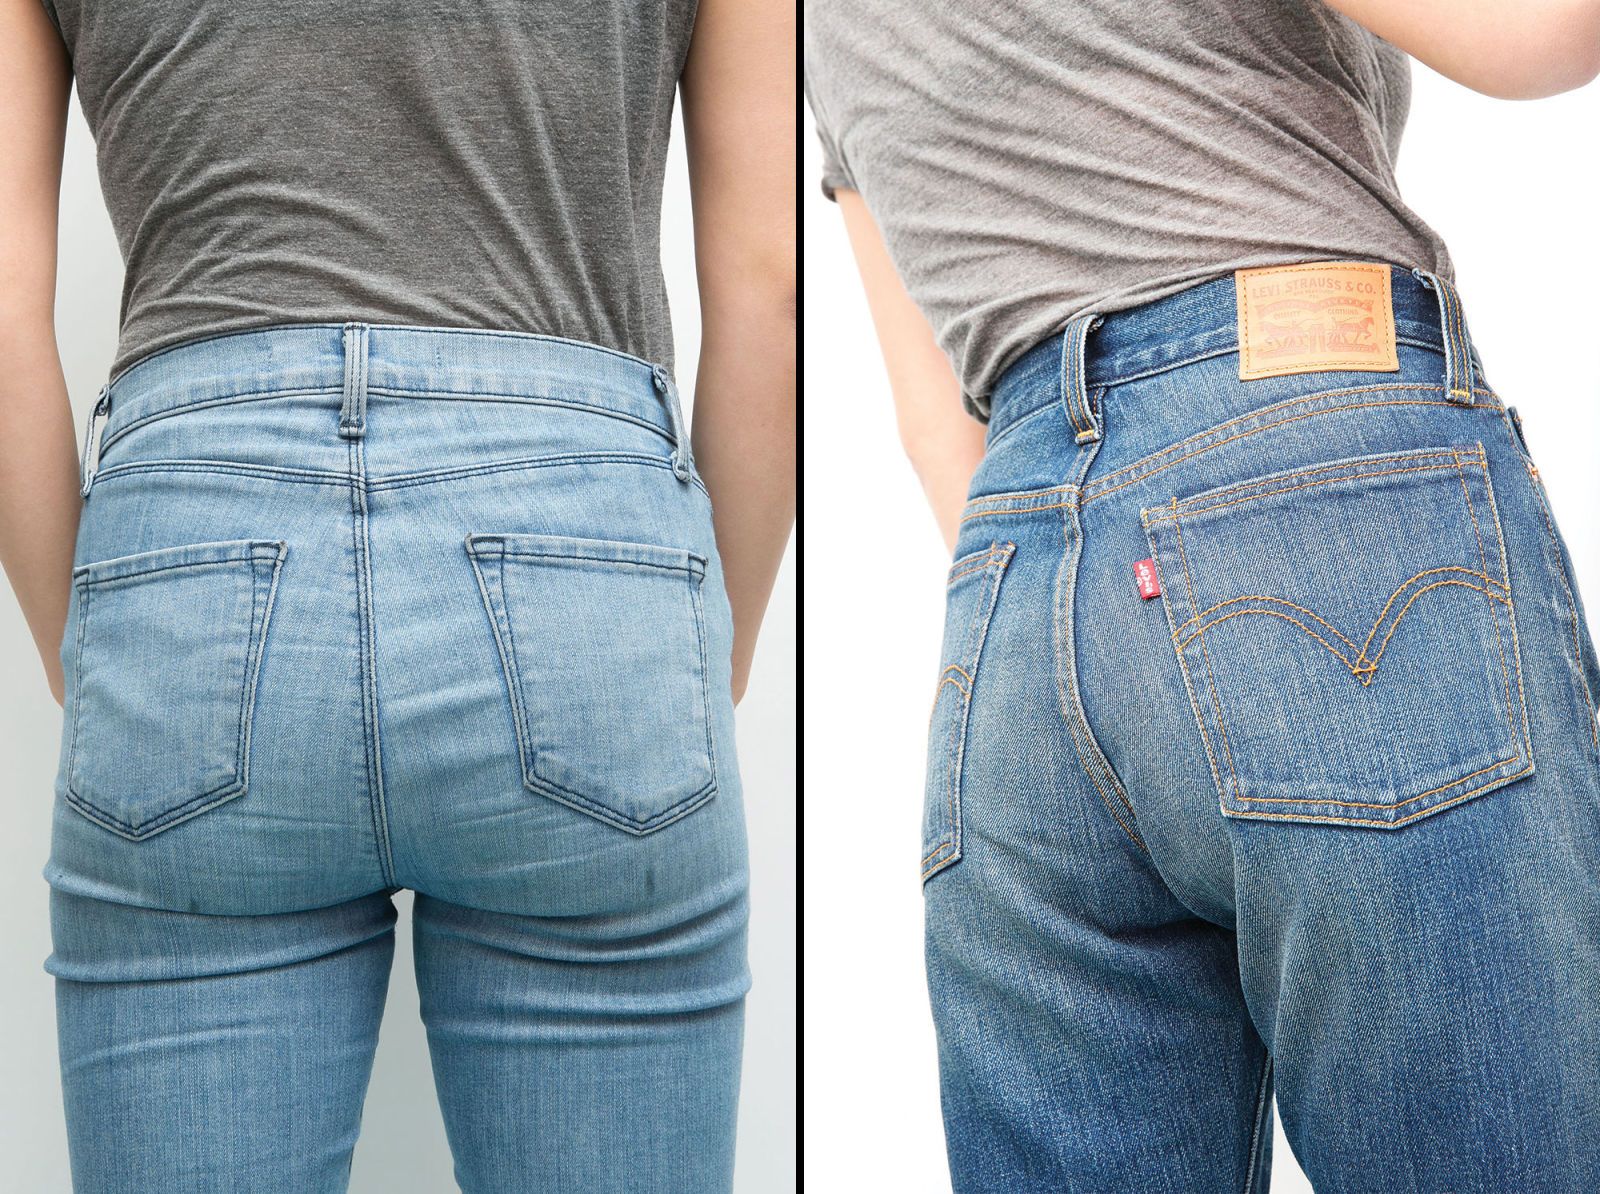 wedgie in jeans